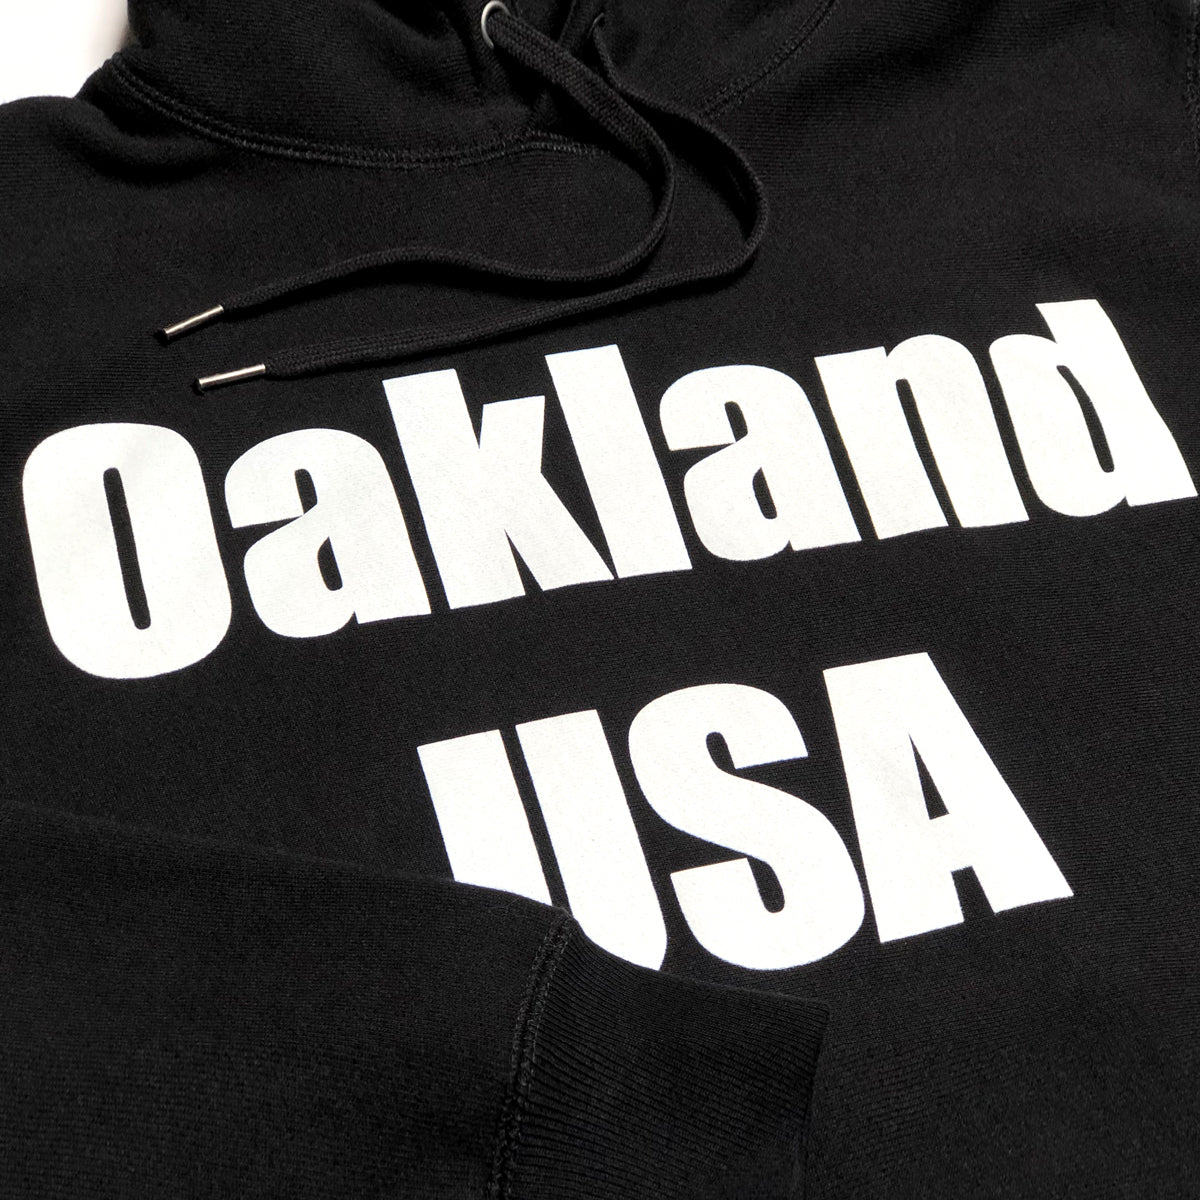 Close-up of large white Oakland USA wordmark logo on the chest of a black hoodie.